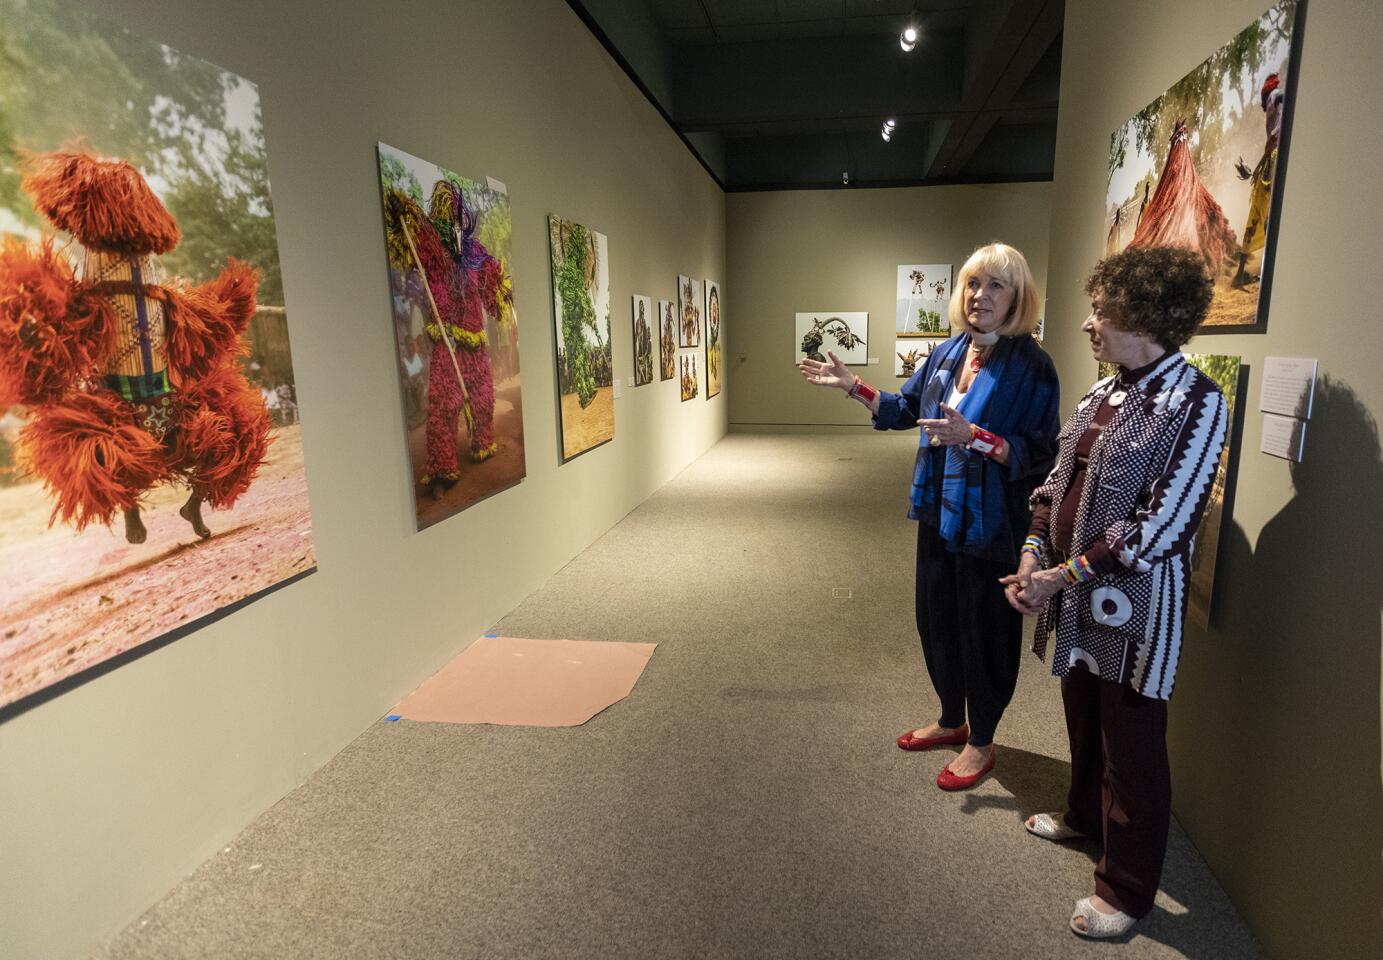 Angela Fisher, left, and Carol Beckwith speak about their exhibit "African Twilight: Vanishing Rituals & Ceremonies" at the Bowers Museum on July 6.